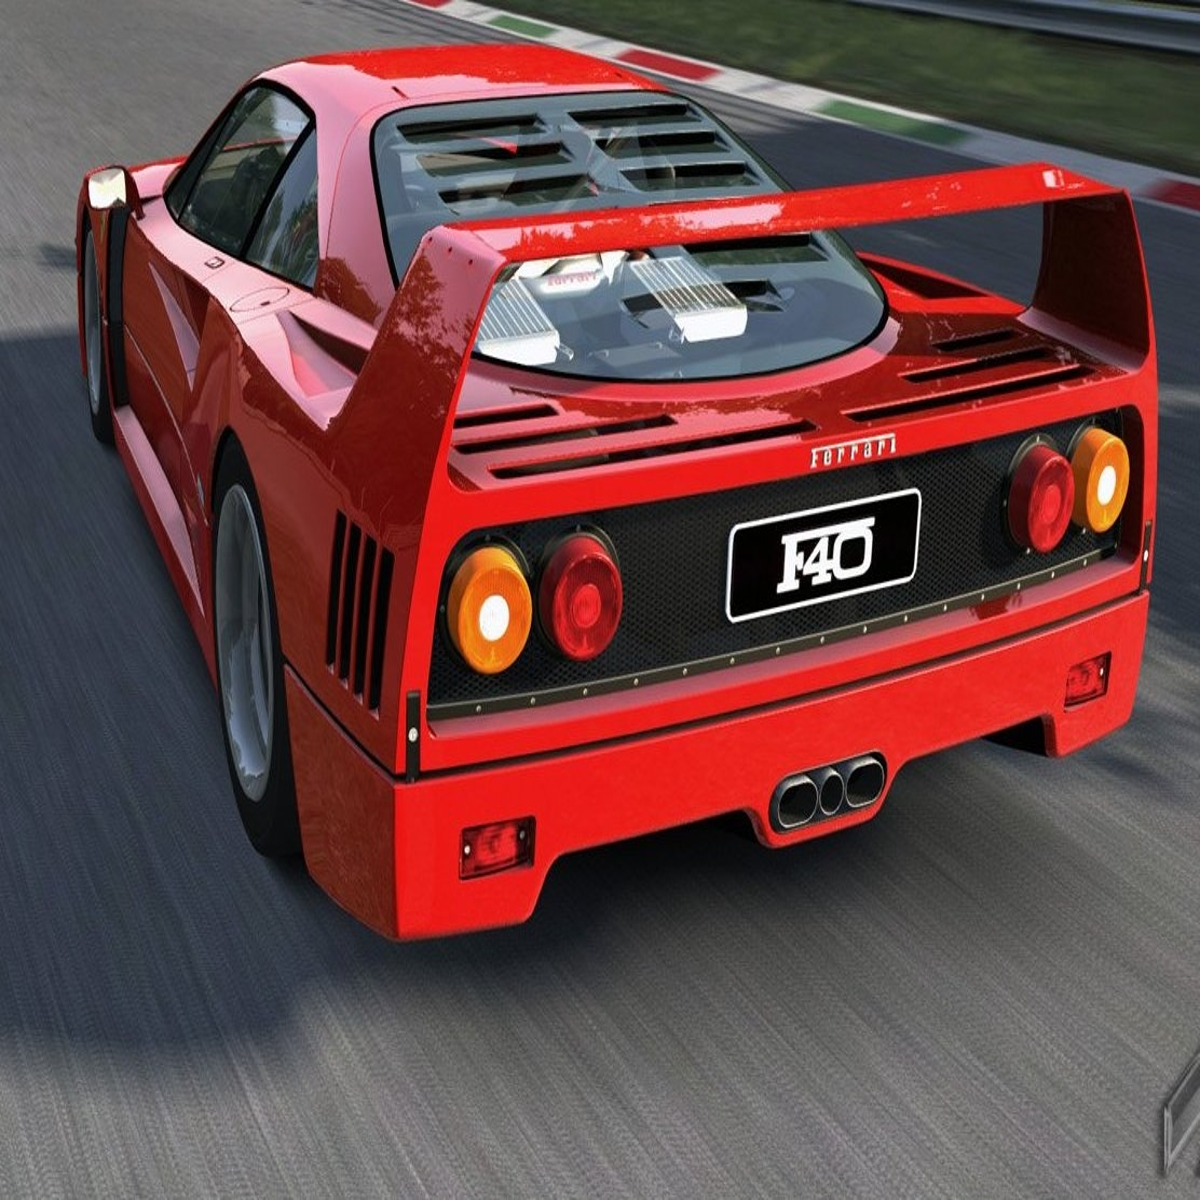 The Best Assetto Corsa Mods: 10 Best Mods To Install 2023